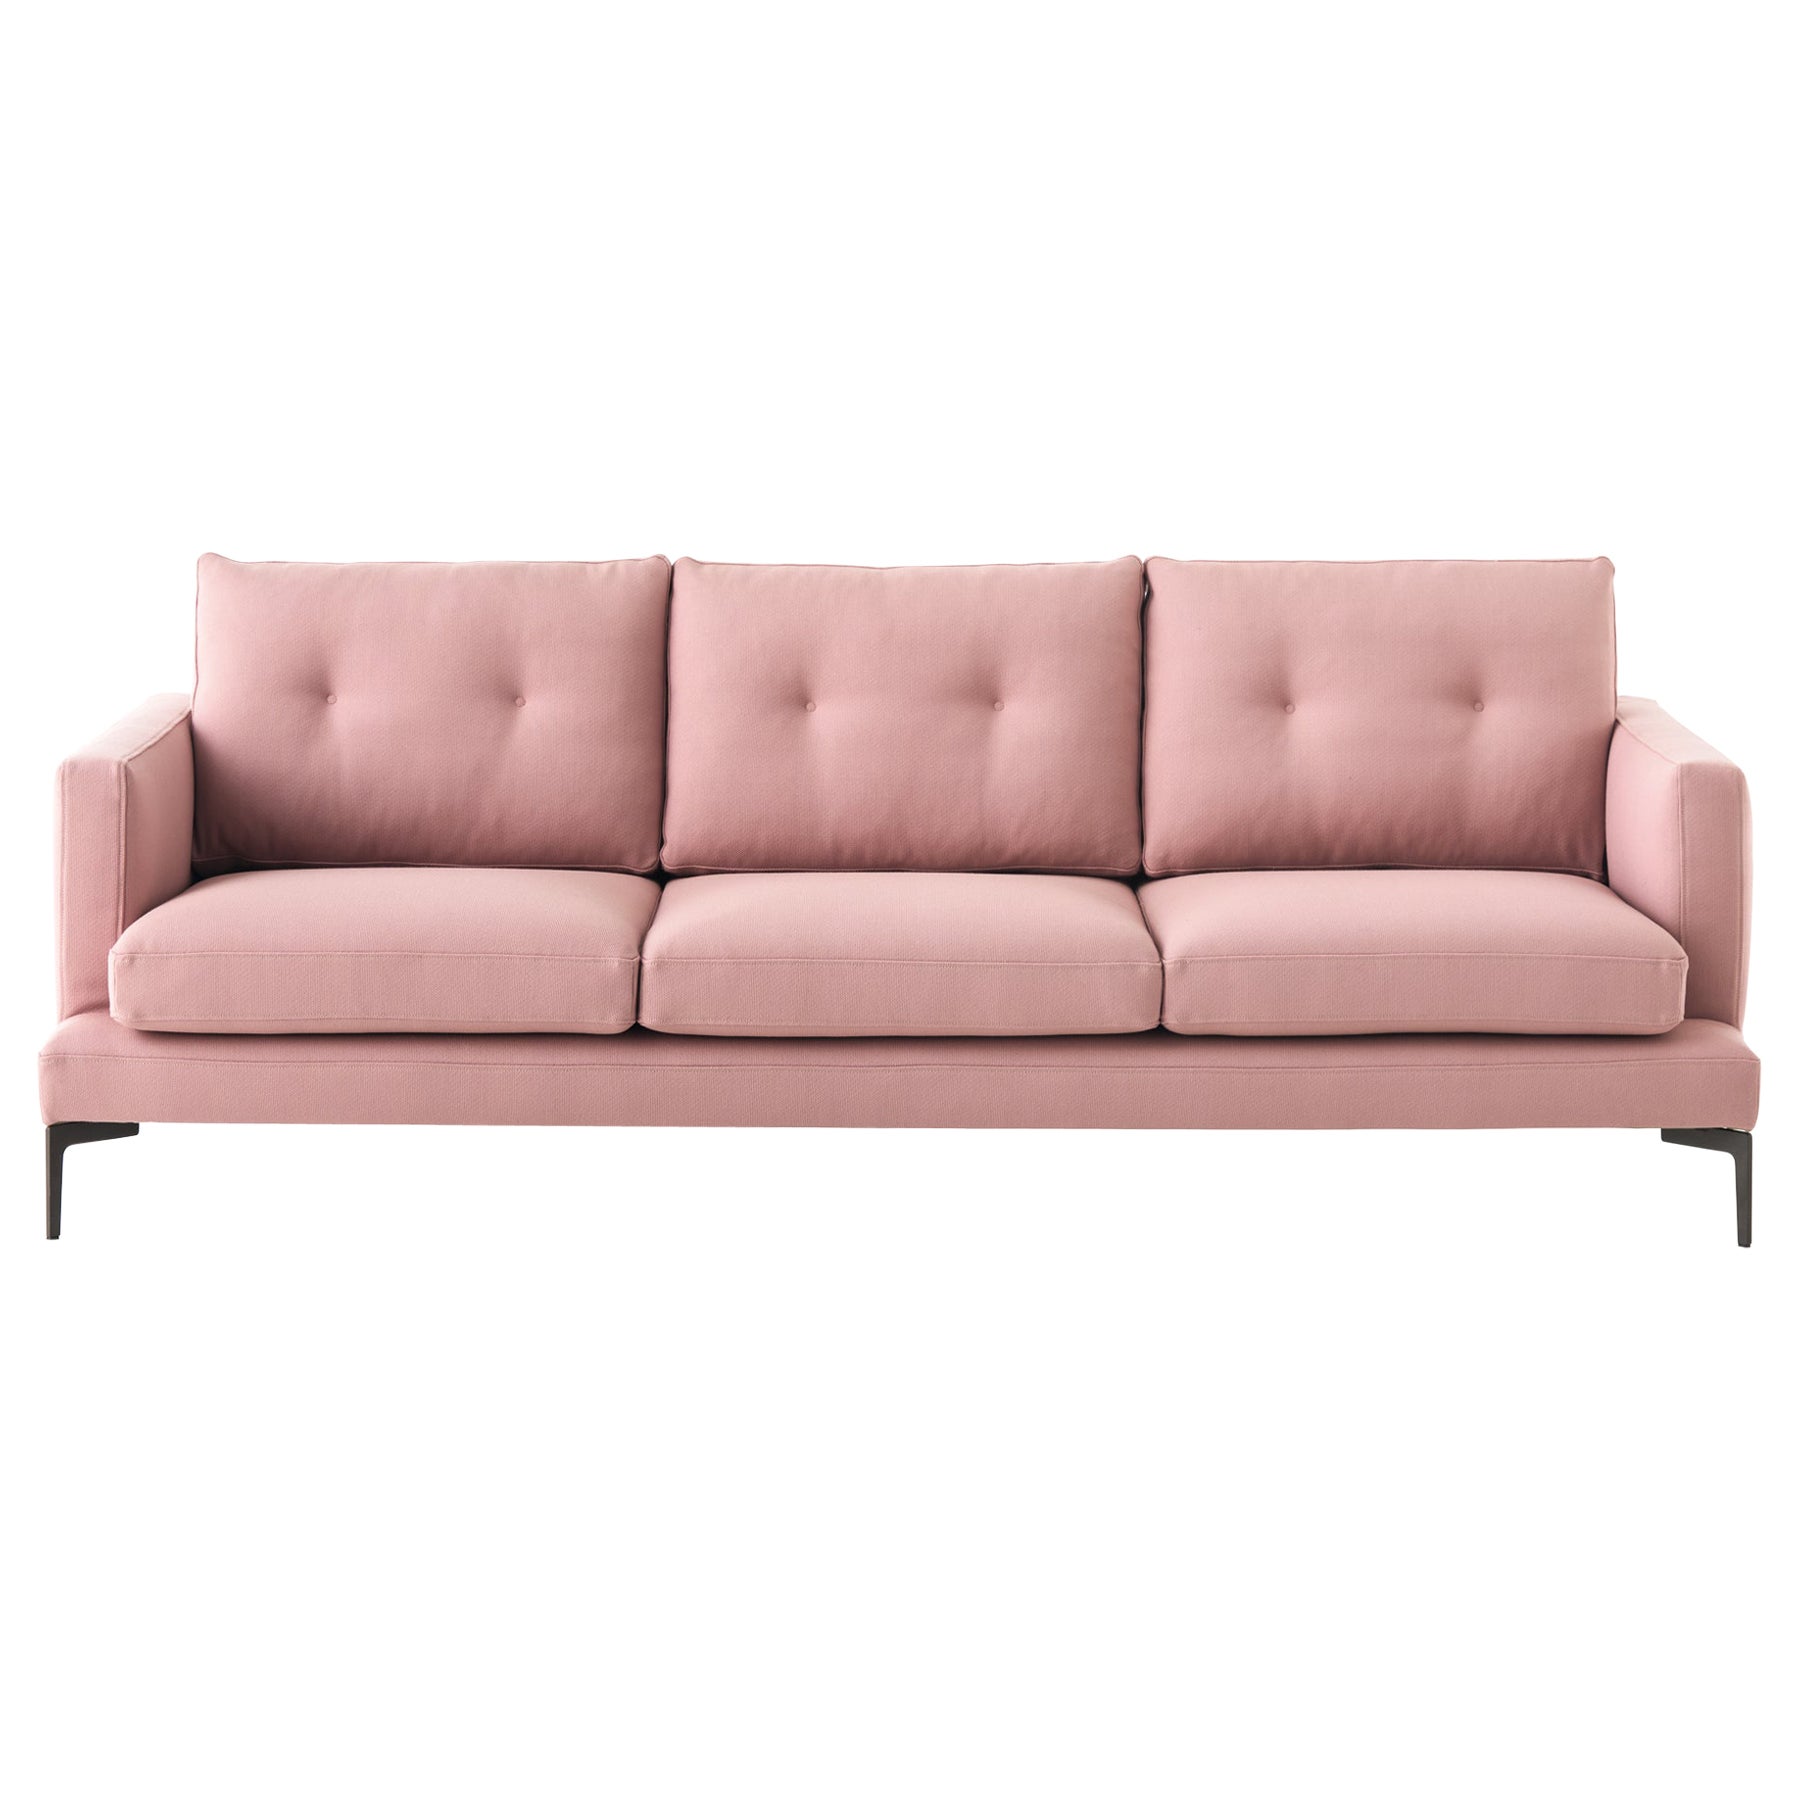 Essentiel 3-Seat 250 Sofa in Smile Pink Upholstery & Grey Legs by Sergio Bicego For Sale